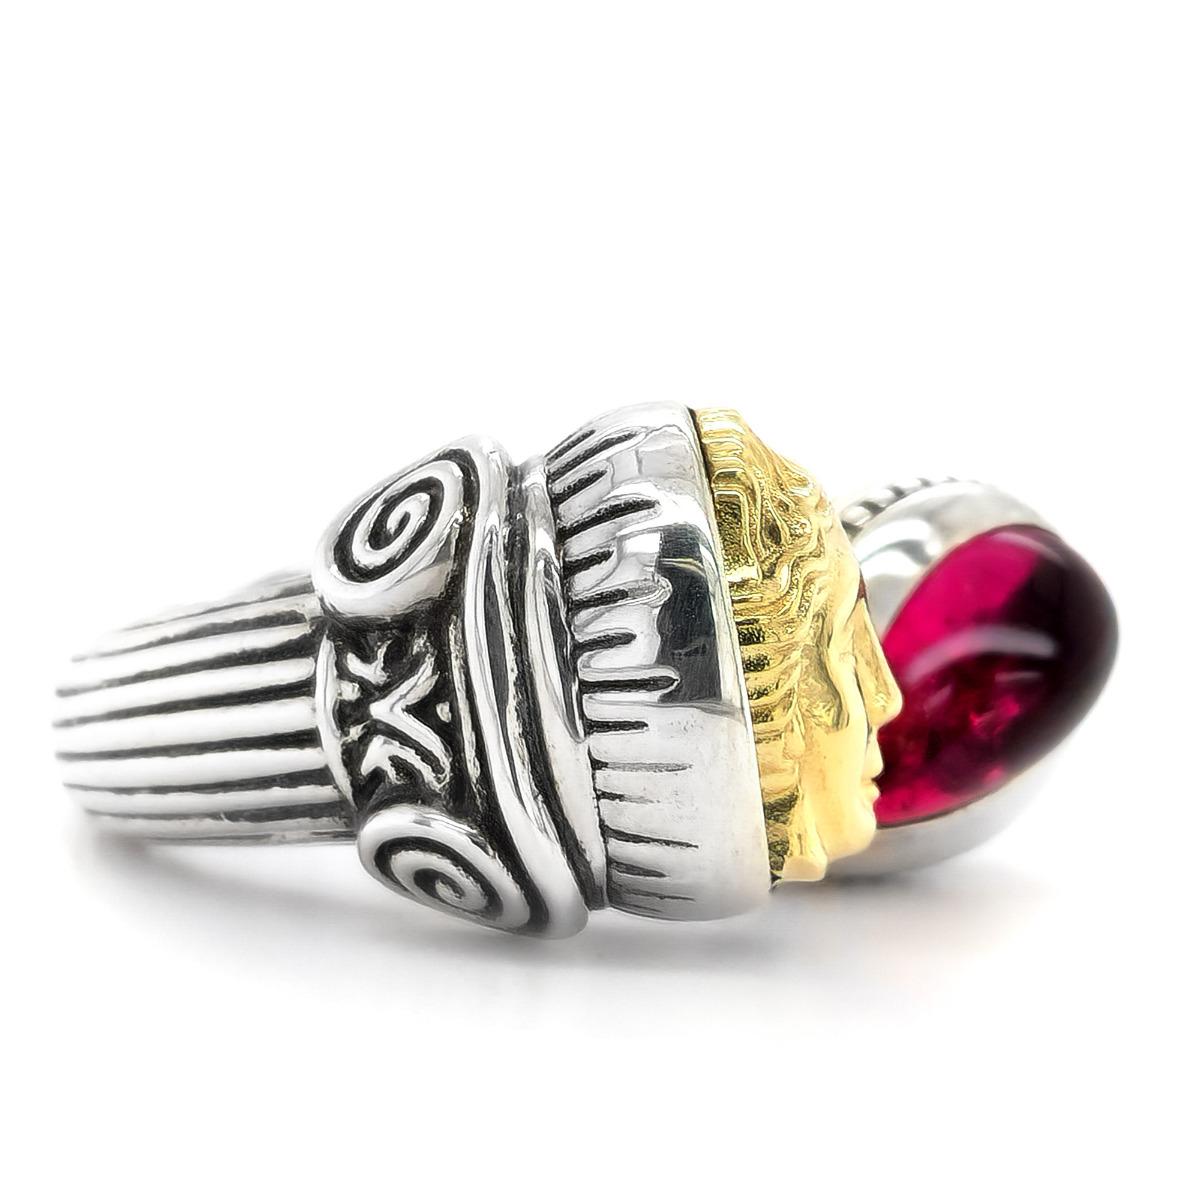 Ring Overview
SKU
4464
Center Stone
Rubellite
Metal Type
Silver
Metal Weight
15.75 gr
Report
N/A
Size
7.5

Center Stone
Quantity
1
Total Weight
4.39 carats
Color
Purplish Red
Color intensity
Strong
Shape
Pear
Clarity
Very eye